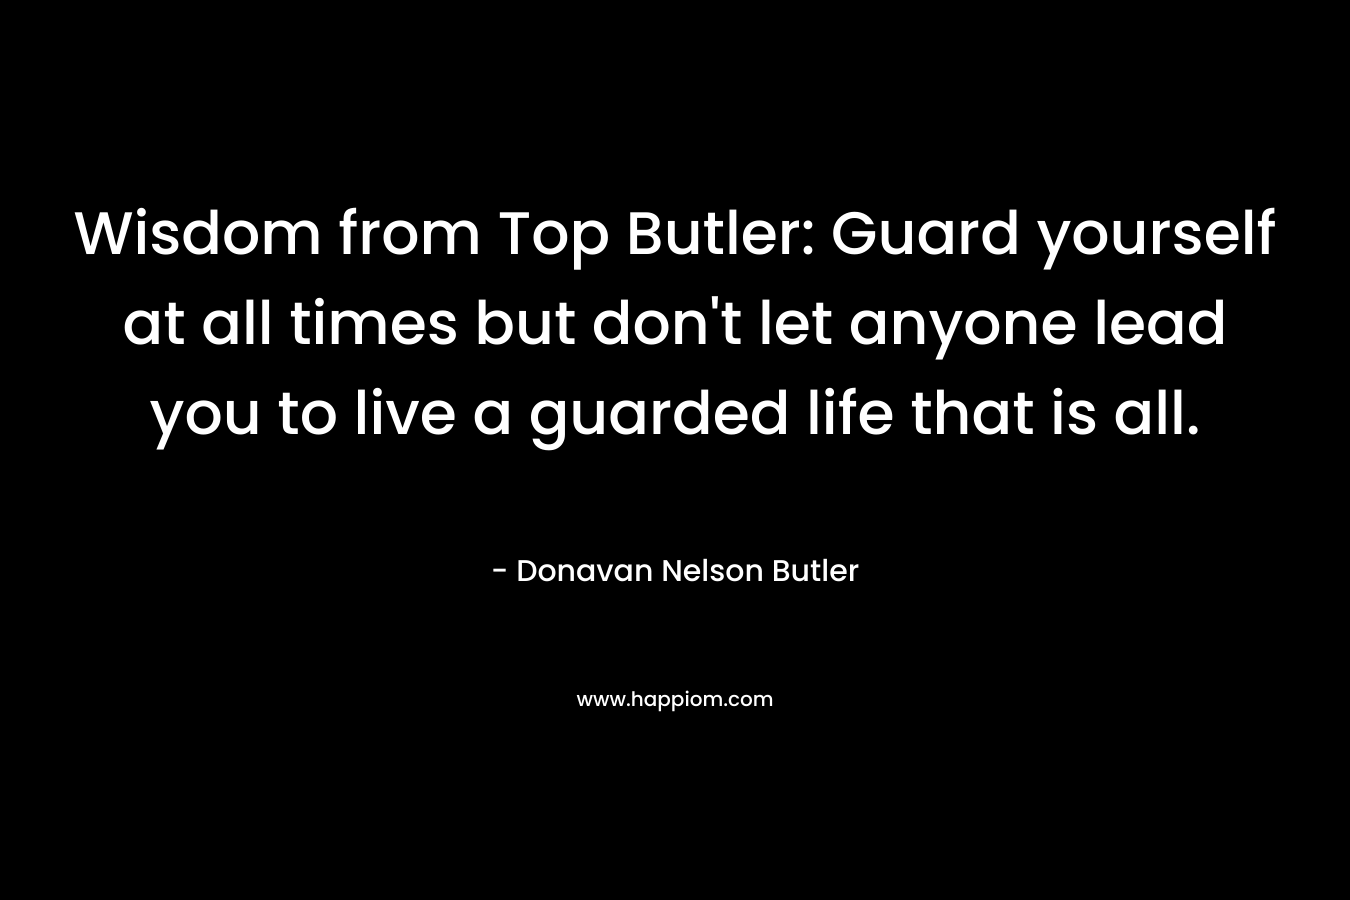 Wisdom from Top Butler: Guard yourself at all times but don't let anyone lead you to live a guarded life that is all.